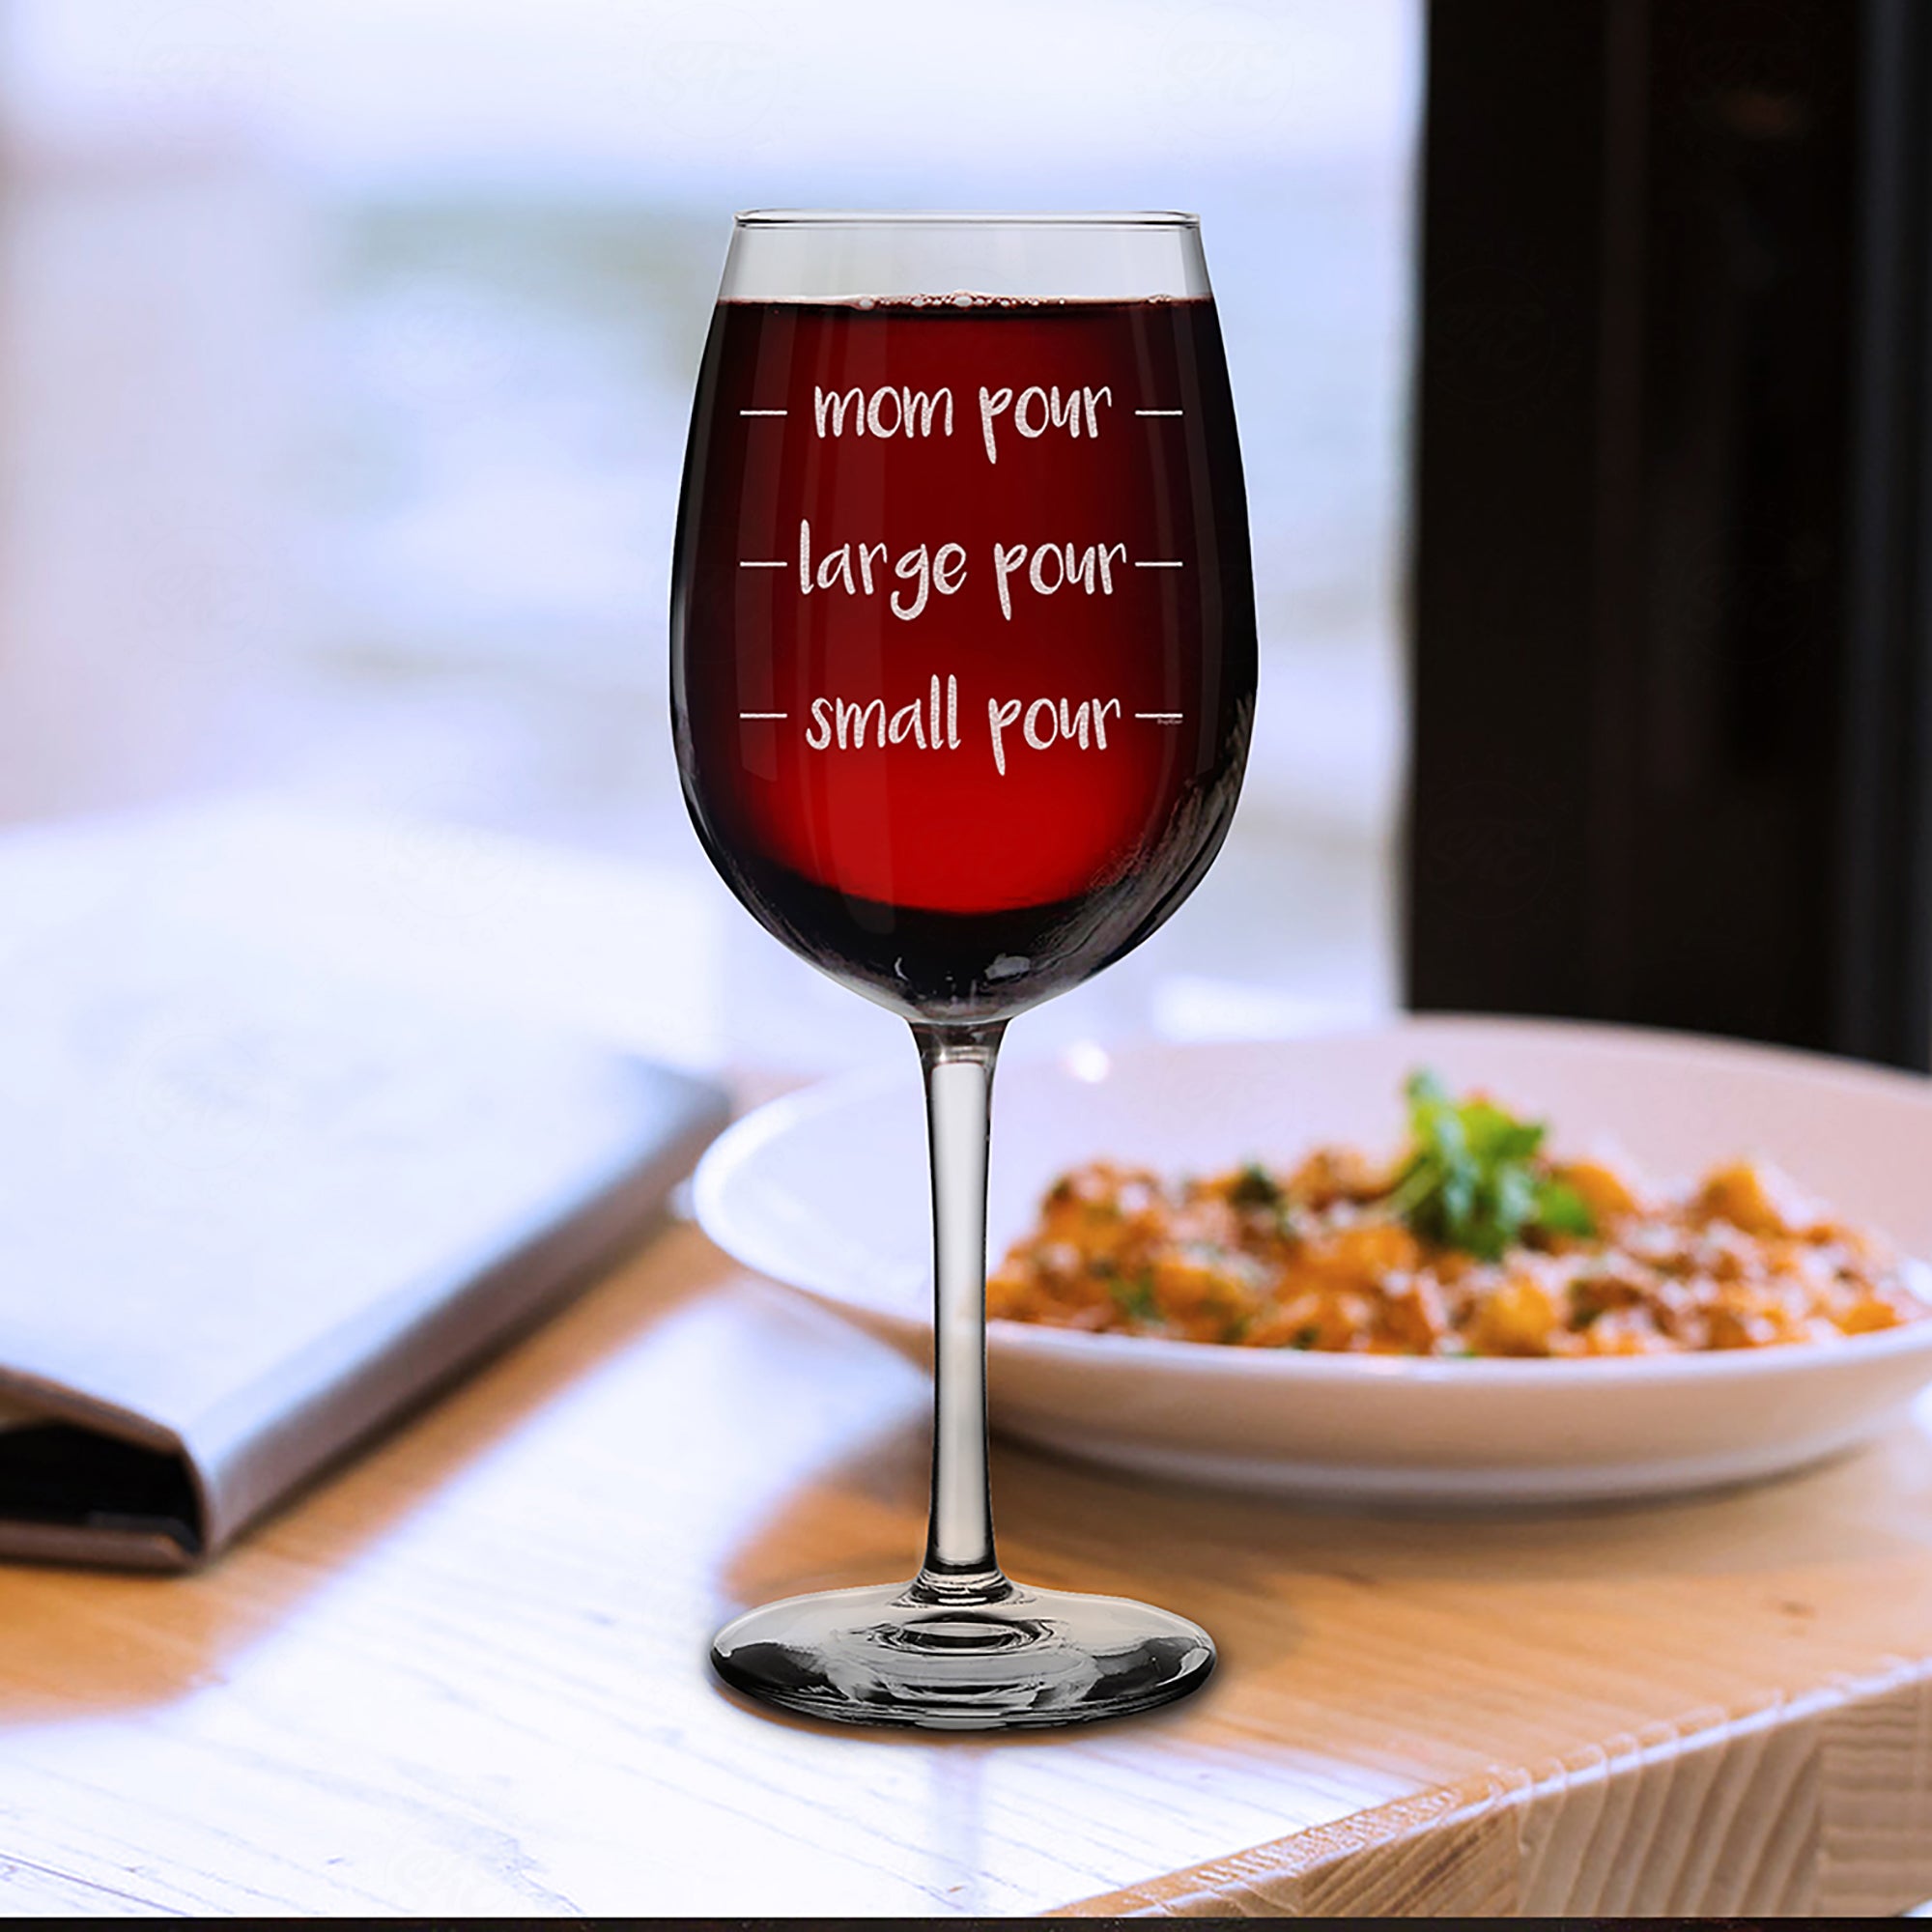 Mom Pour Large Pour Small Pour Engraved Stemmed Wine Glass Funny New Mom Gift (16 oz.)